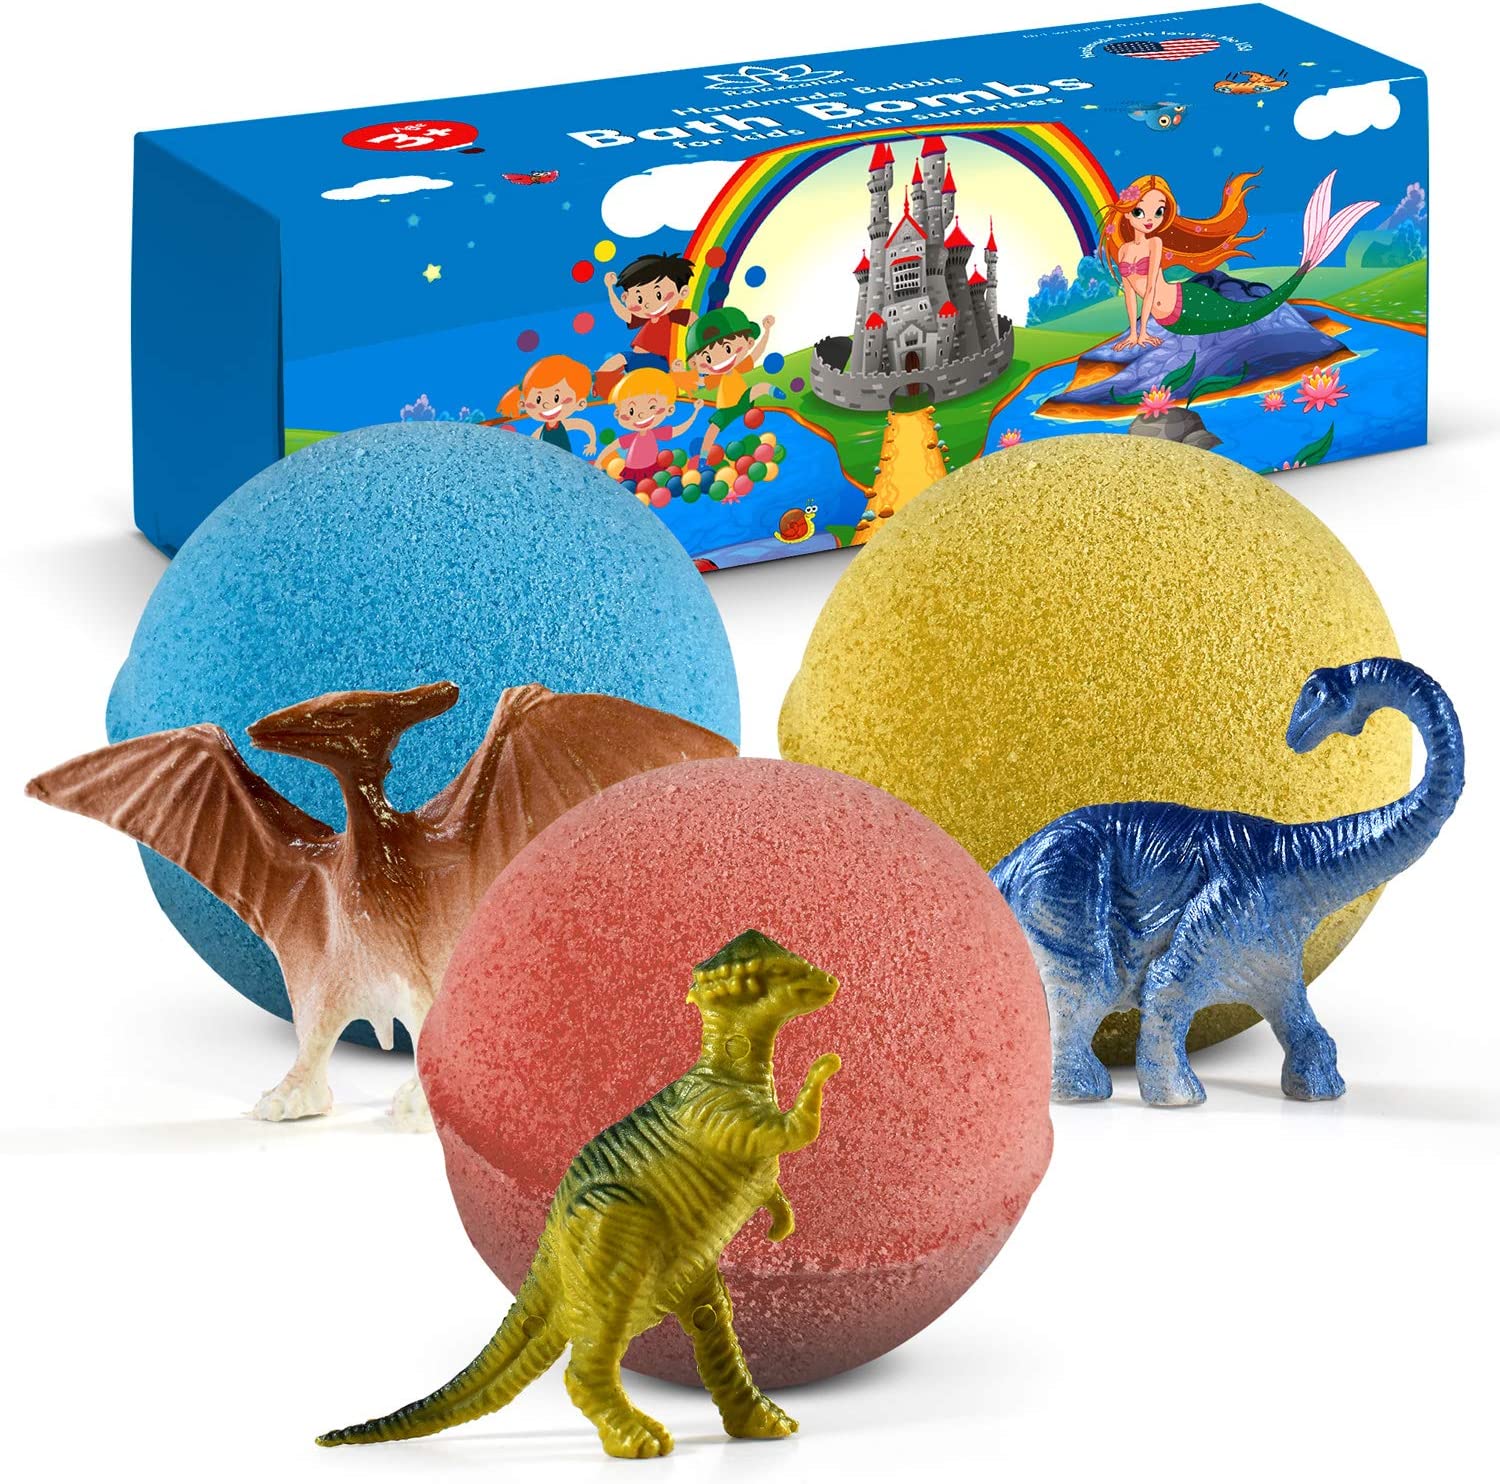 Wholesale Bath Bombs For Kids With Surprise Dinosaurs Inside